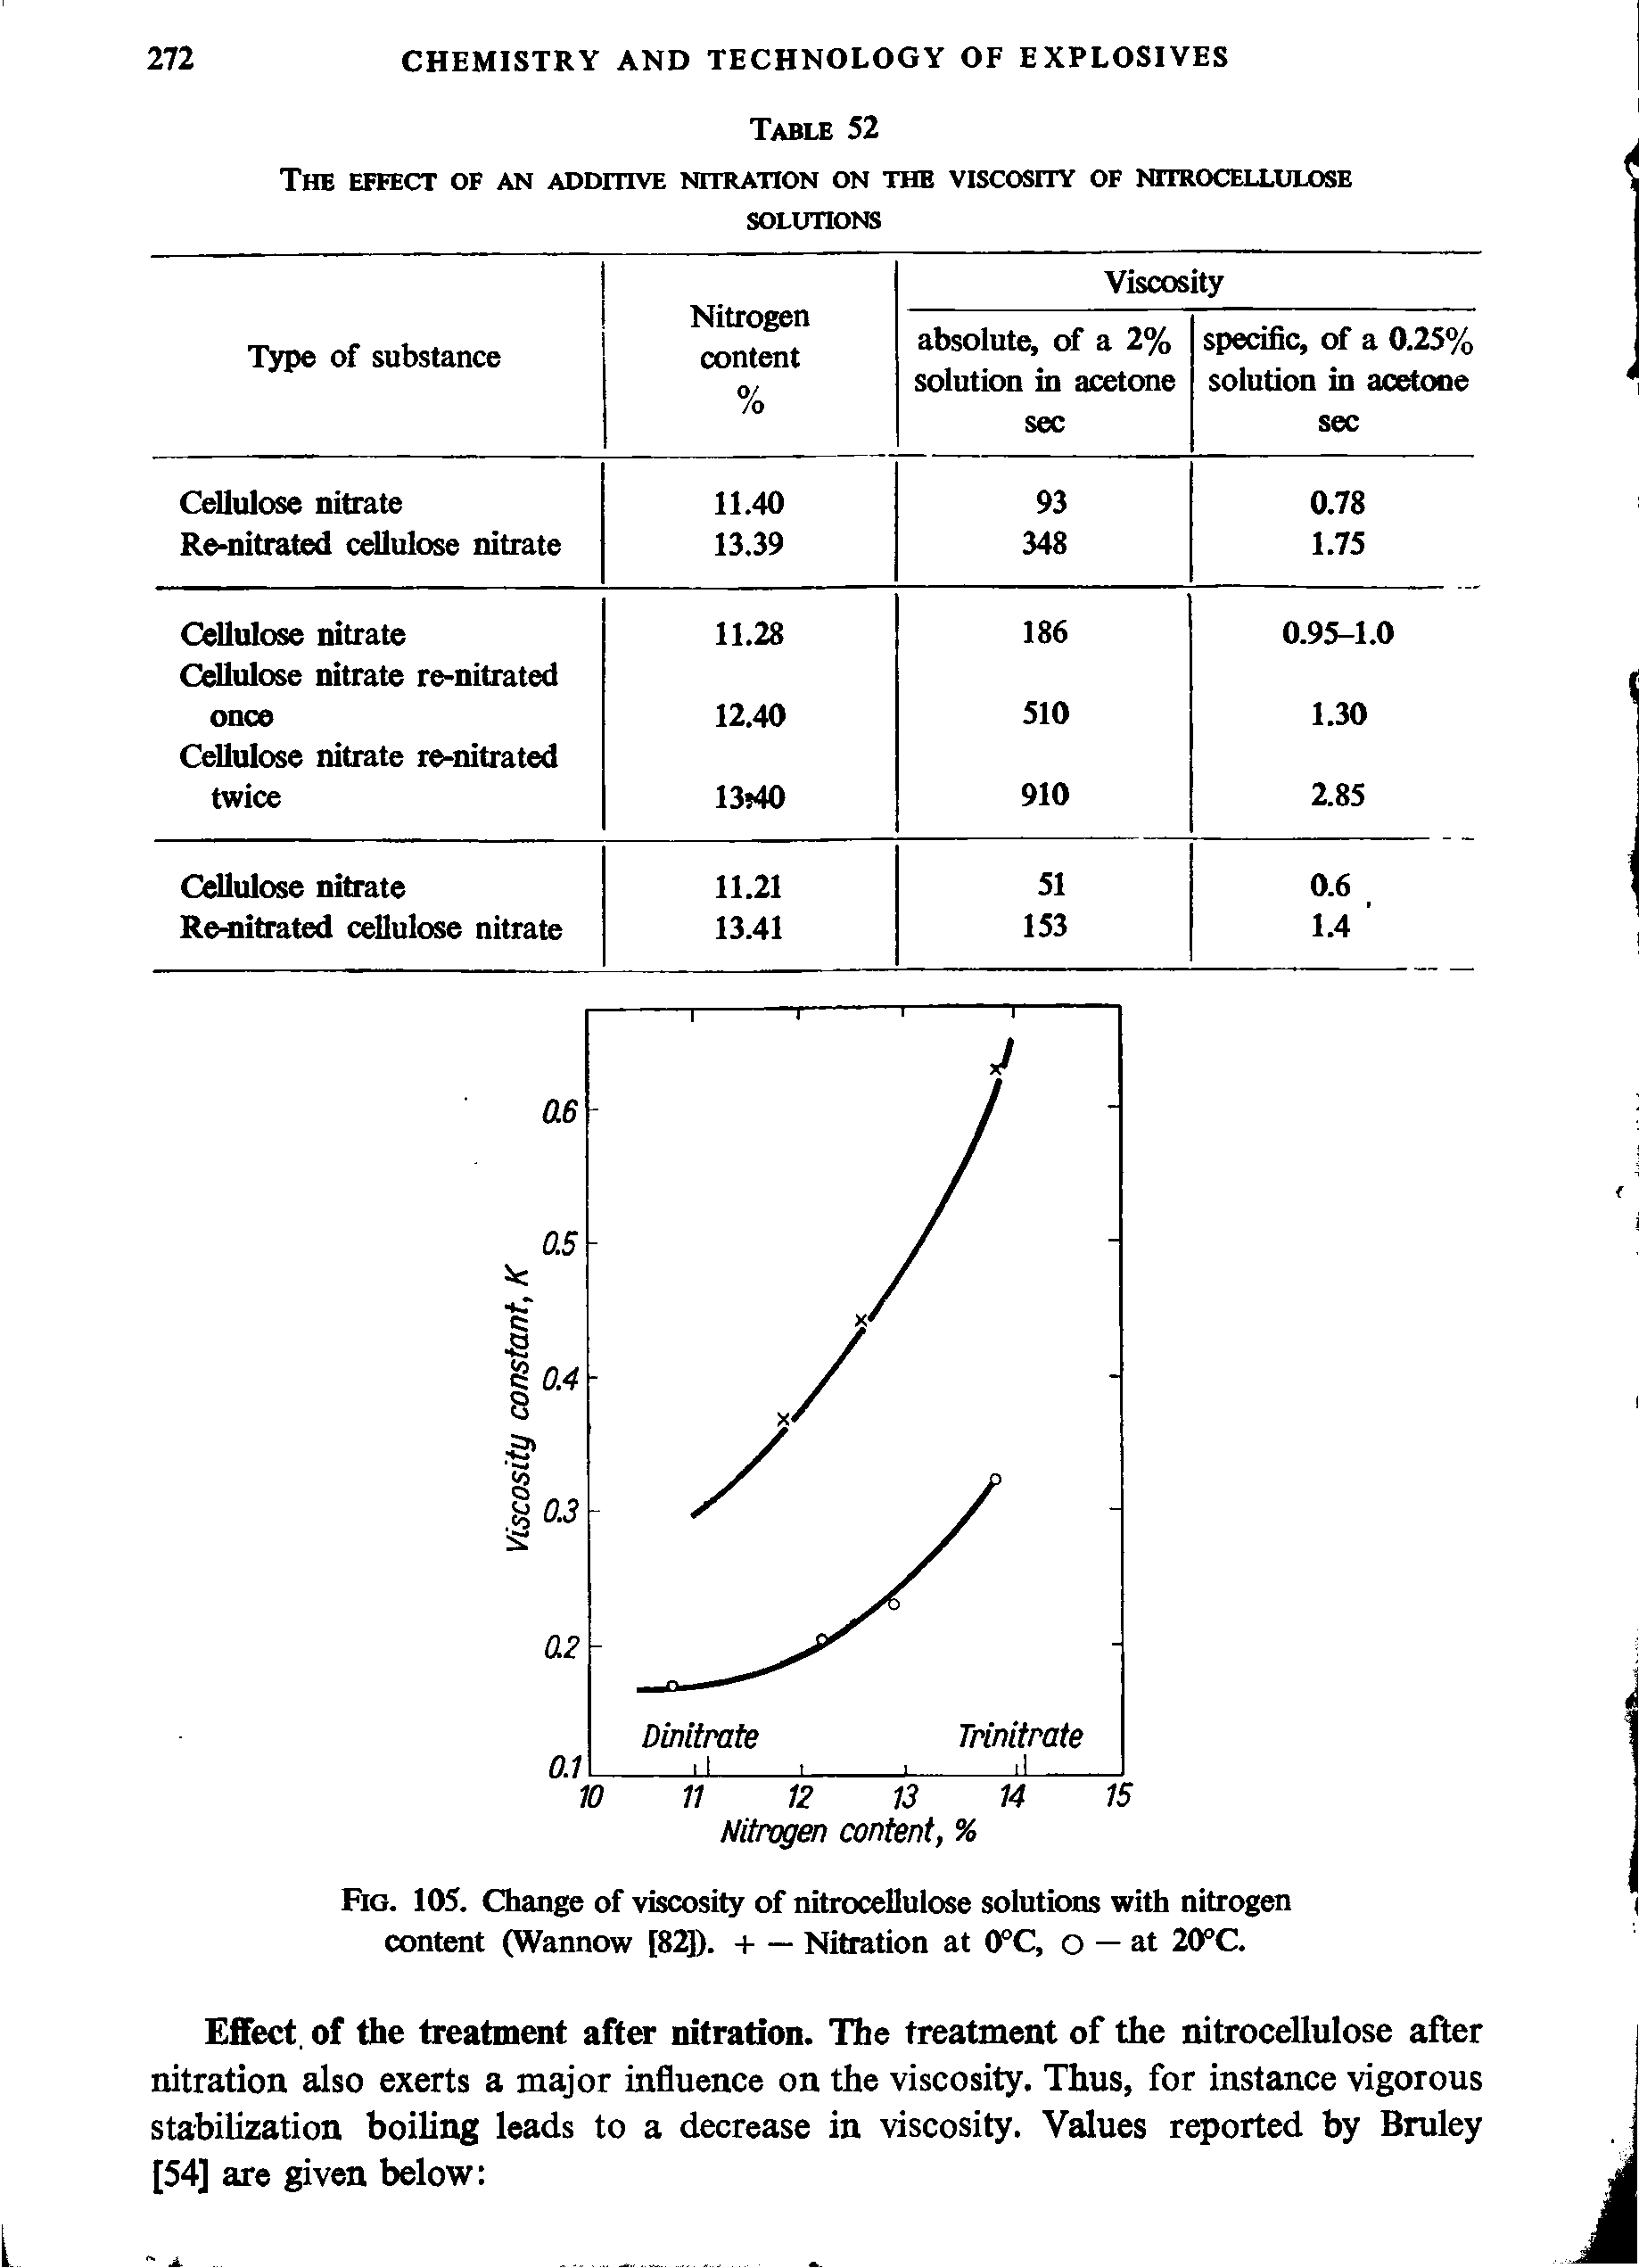 Fig. 105. Change of viscosity of nitrocellulose solutions with nitrogen content (Wannow [82]). h— Nitration at 0PC, o — at 20°C.